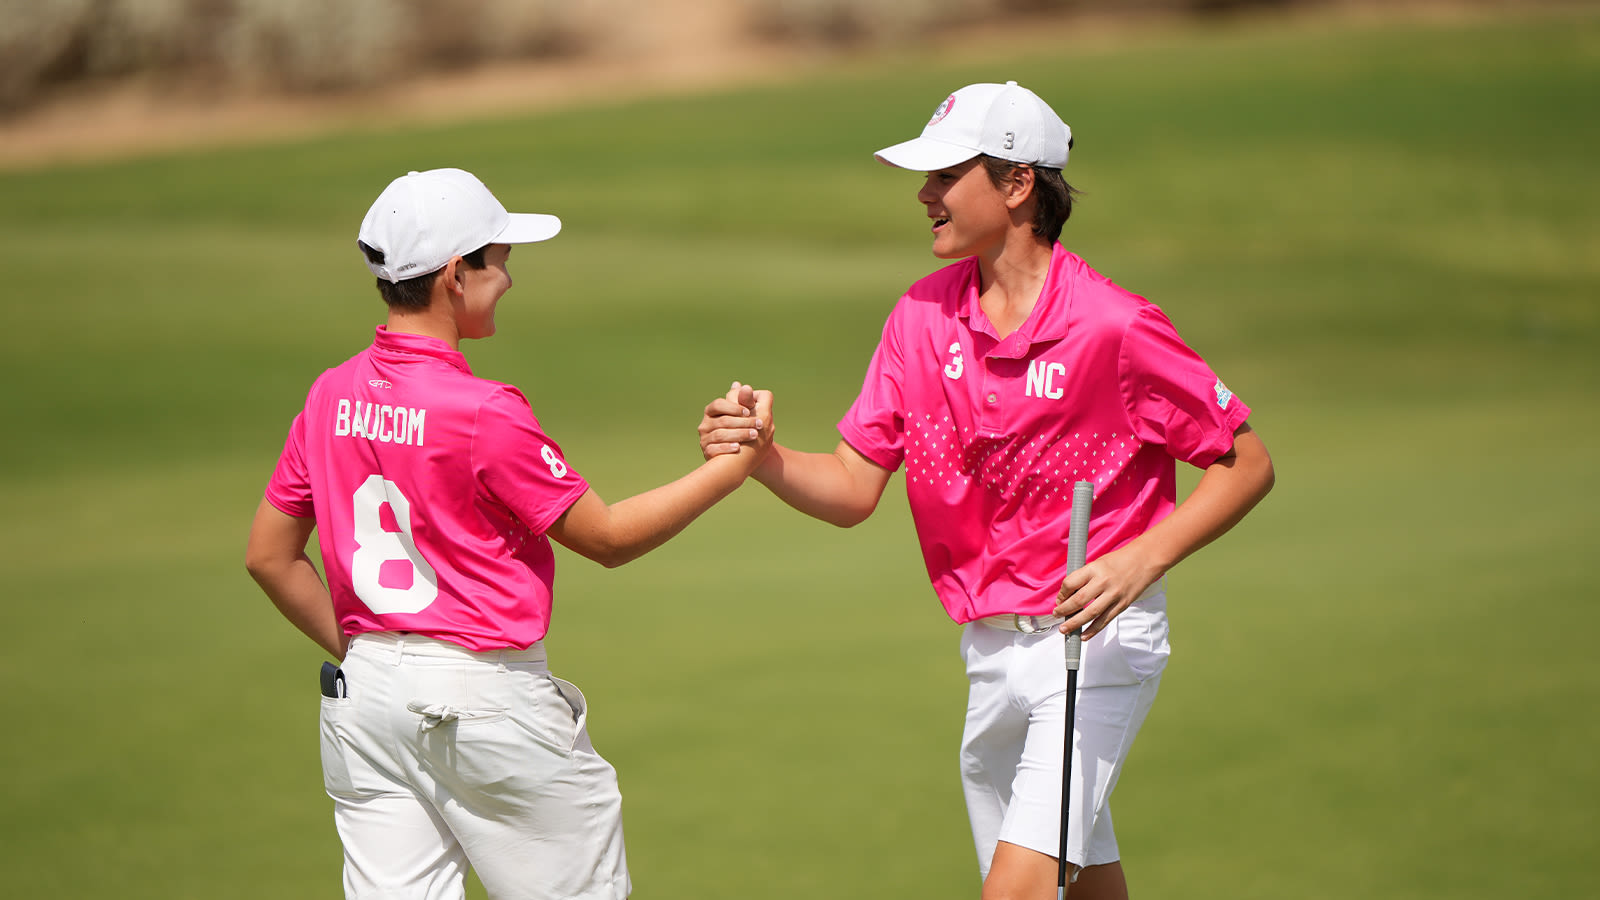  Graden Lomax reacts with Grayson Baucom of Team North Carolina after scoring a birdie on the 15th hole during the second round of the 2022 National Car Rental PGA Jr. League Championship at Grayhawk Golf Club on October 8, 2022 in Scottsdale, Arizona. (Photo by Darren Carroll/PGA of America)